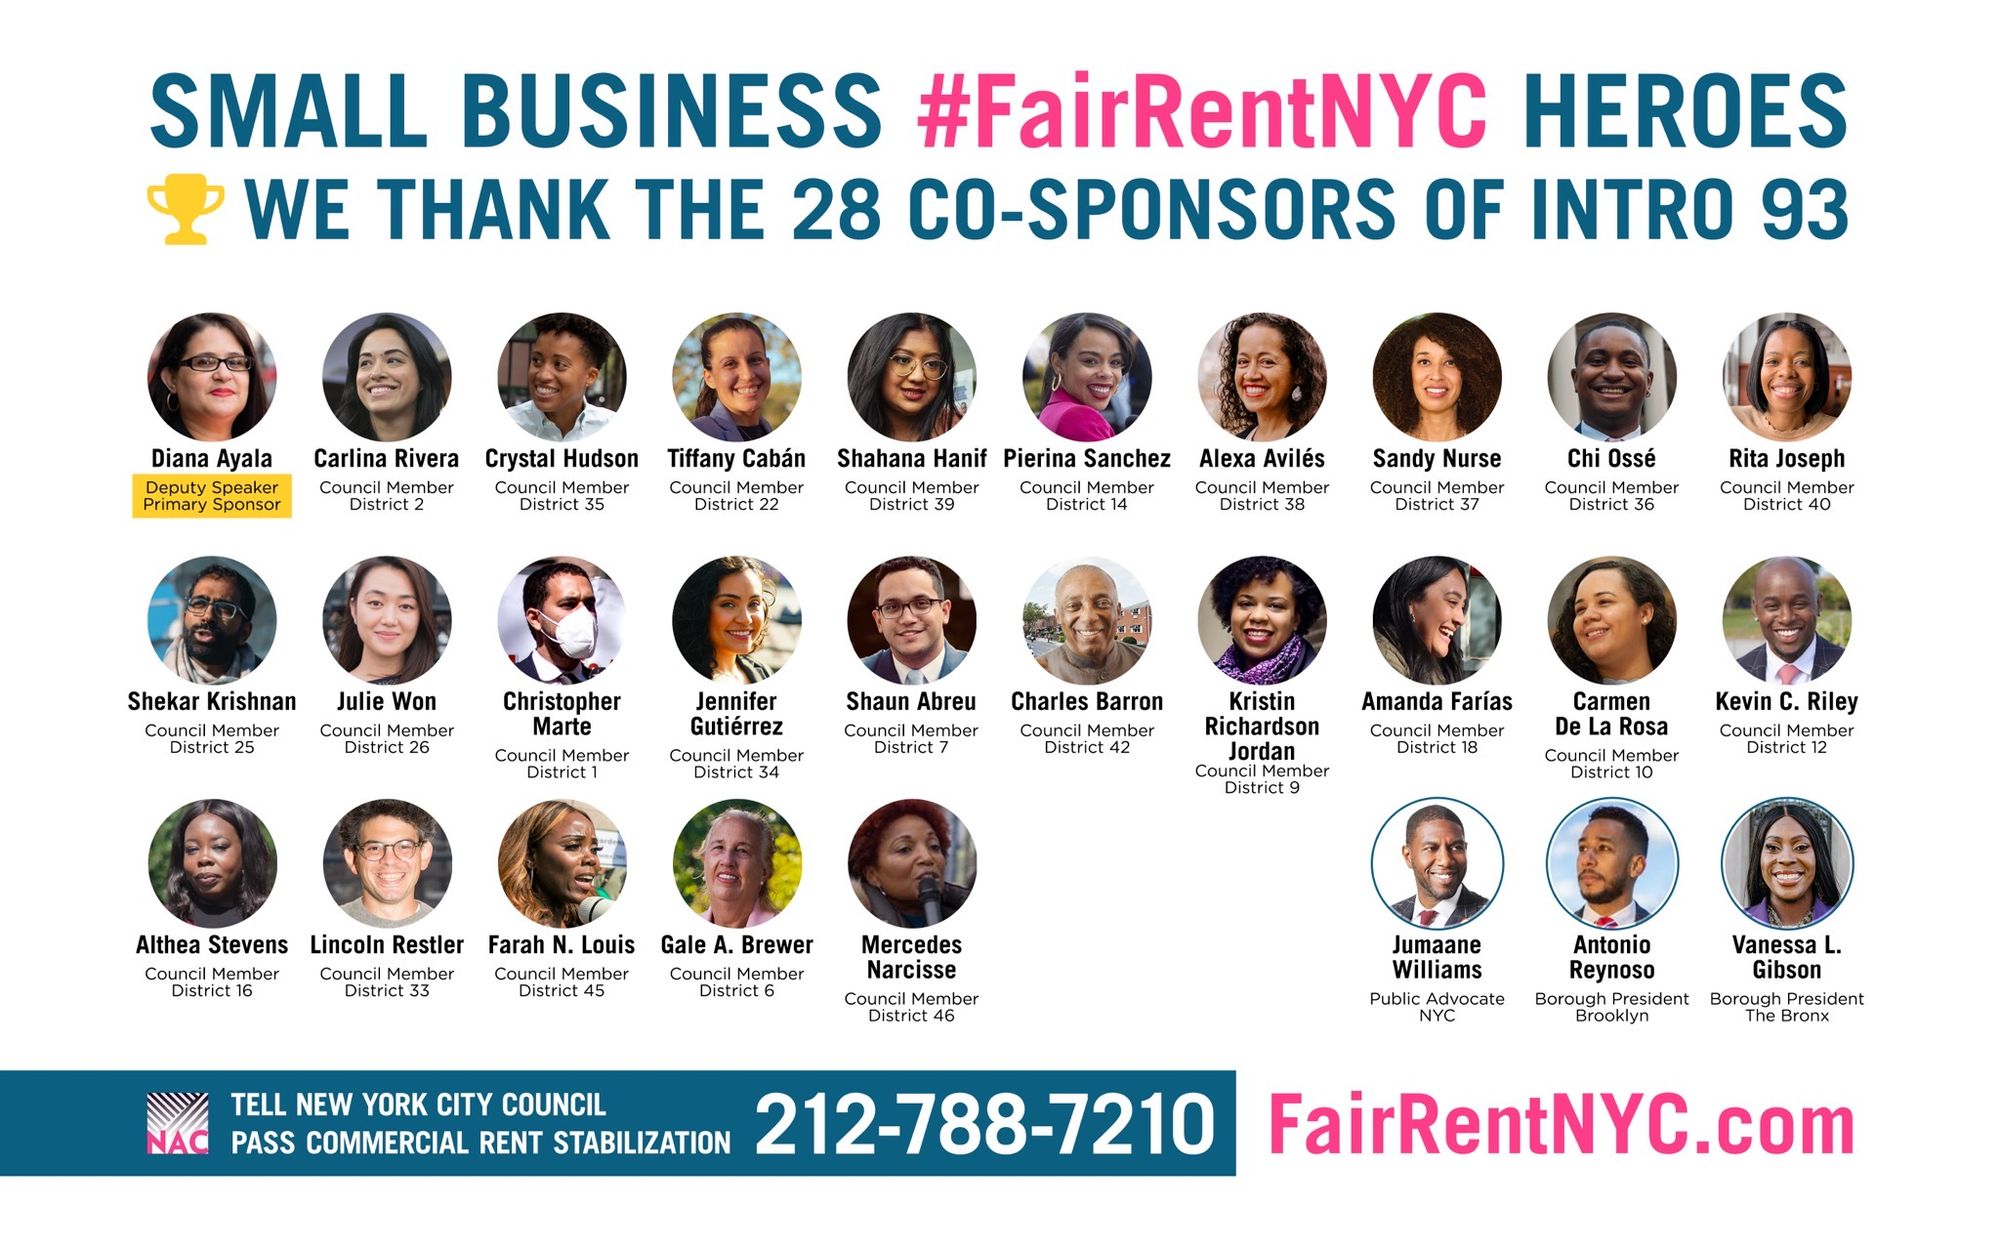 25 City Council Members, The NYC Public Advocate as well as the Brooklyn and Bronx Borough Presidents signed on the #FairRentNYC bill - Join us in Thanking these Small Business Heroes!